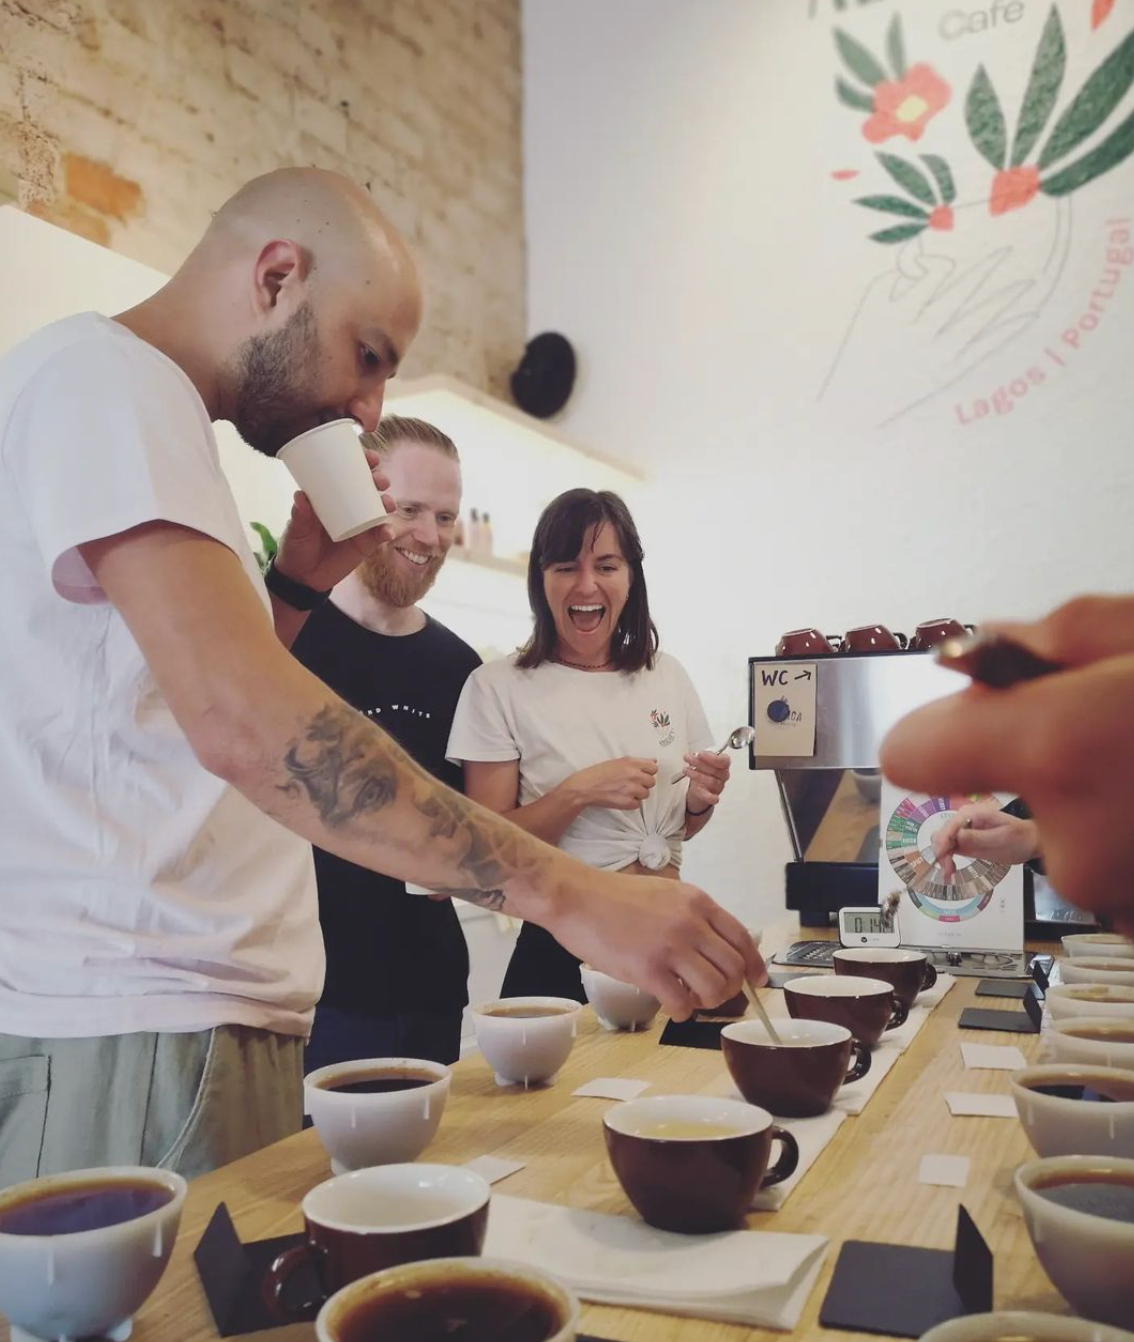 Coffee Sensory Workshop with Shan and Nick in Praia do Burgau, Algarve, Portugal by subcultours